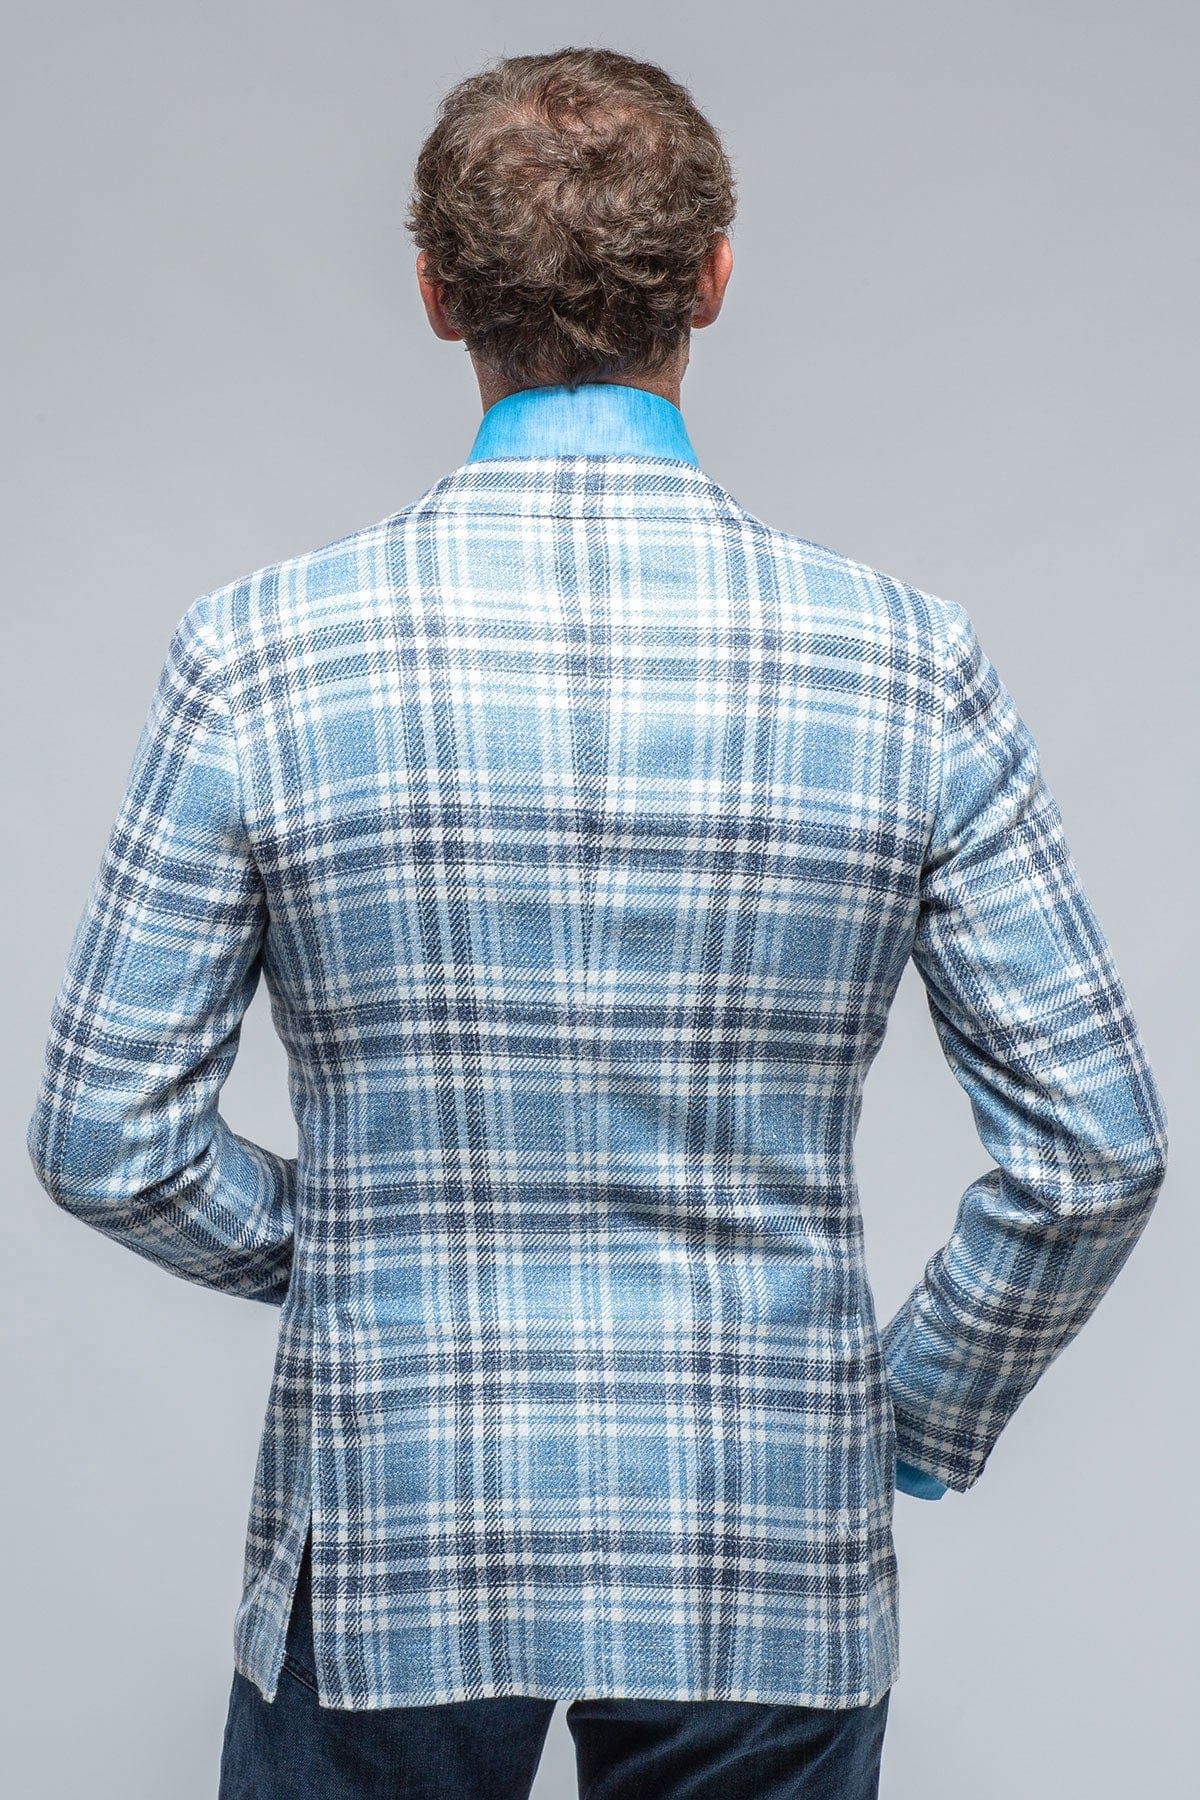 St. Remy Blue Navy and White Check Jacket - AXEL'S